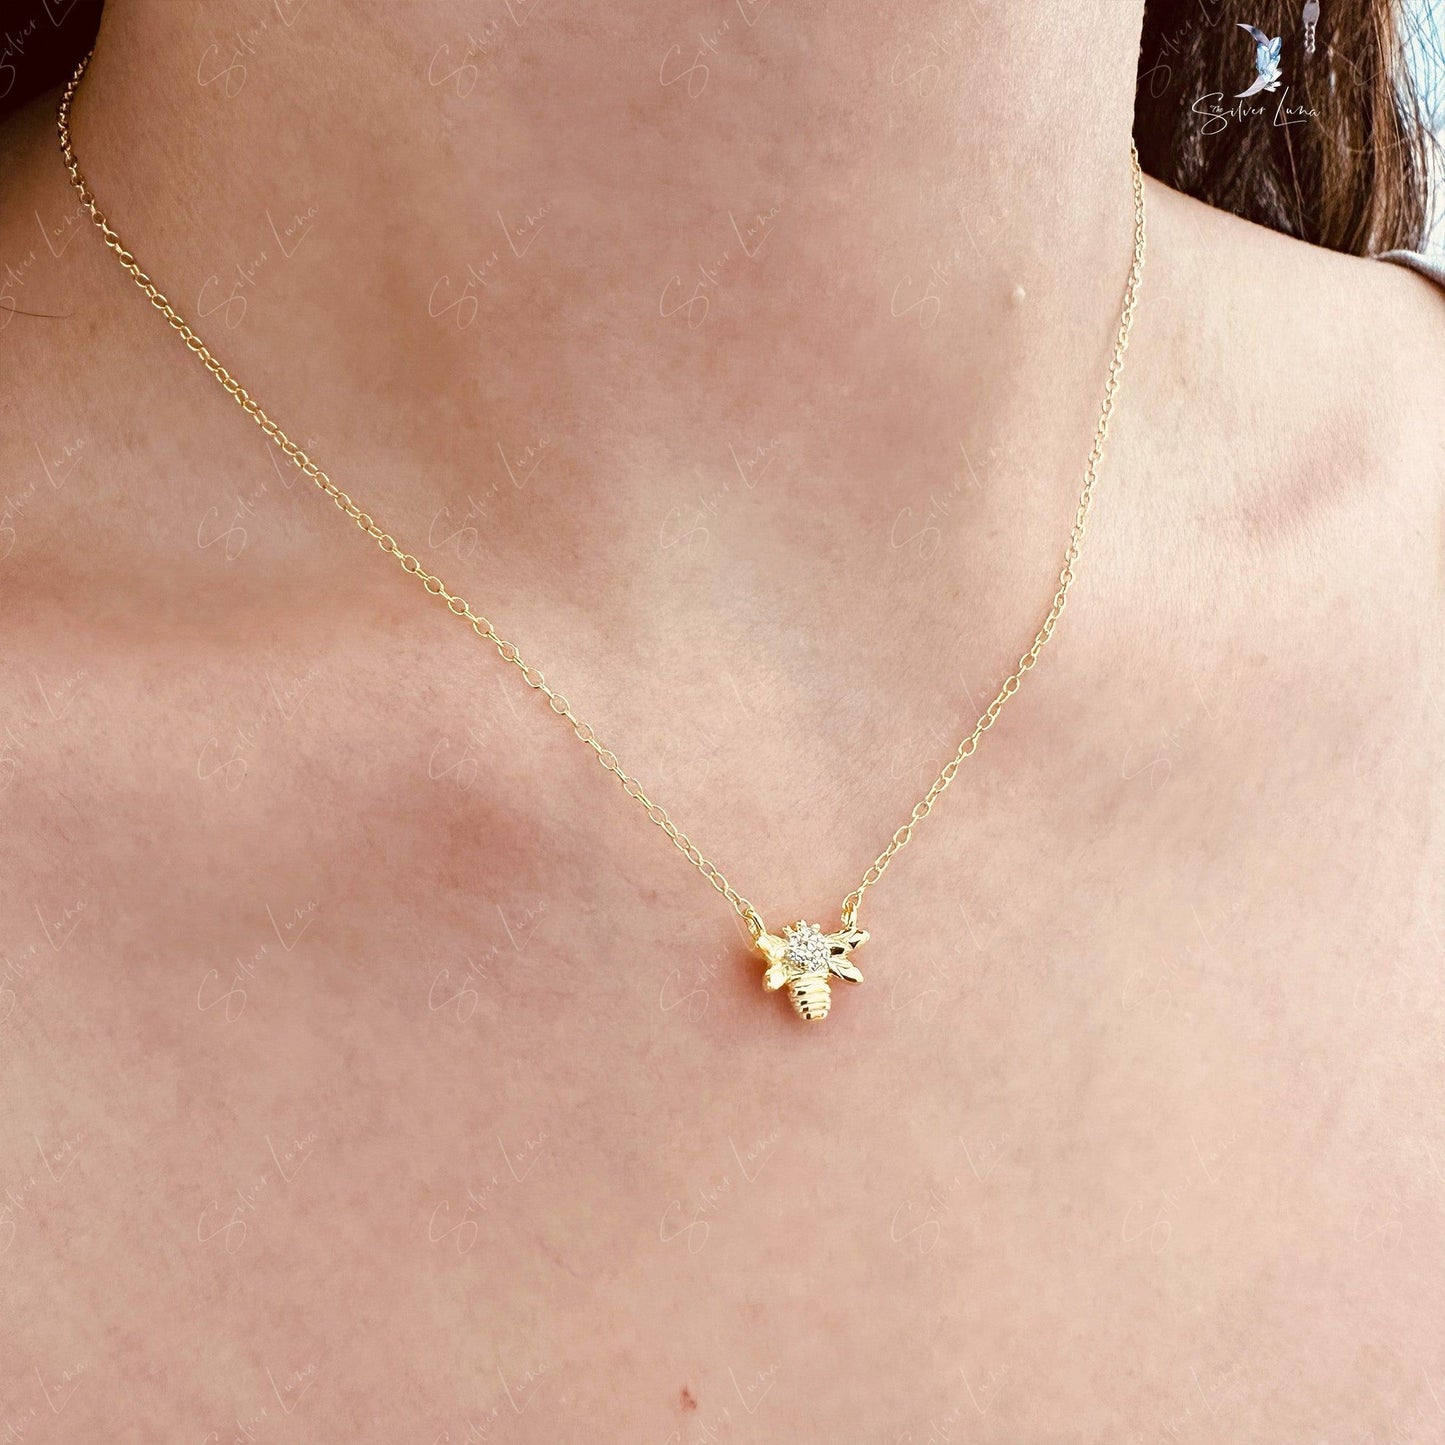 Tiny honey bee sterling silver necklace